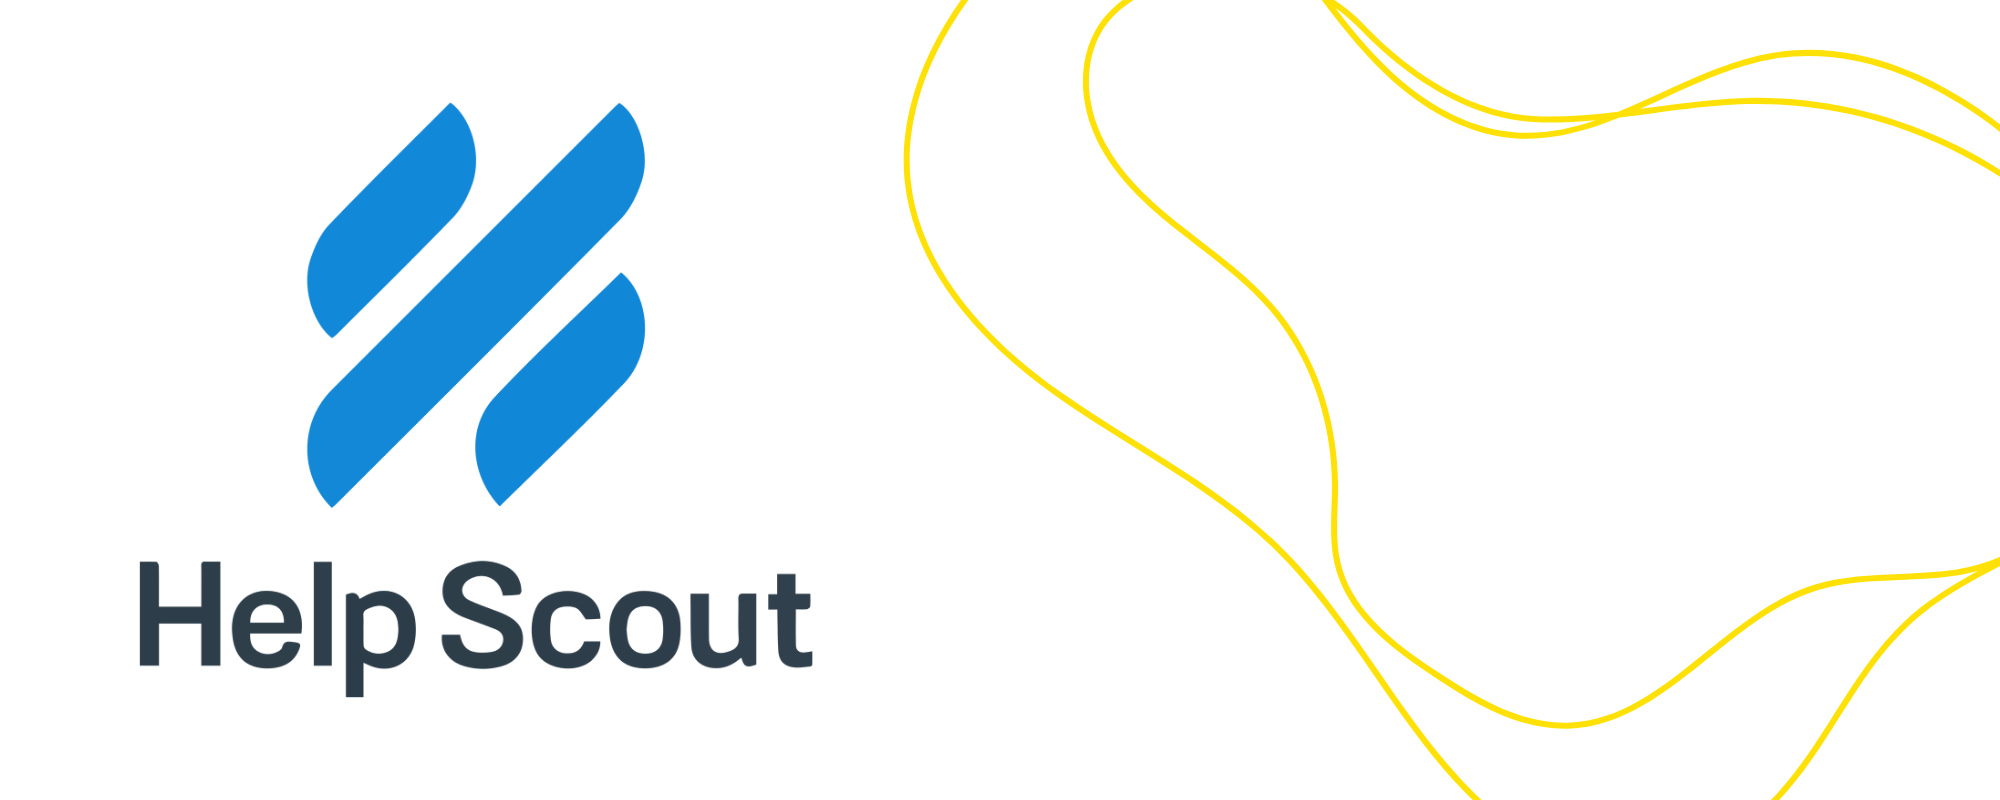 Helpscout logo